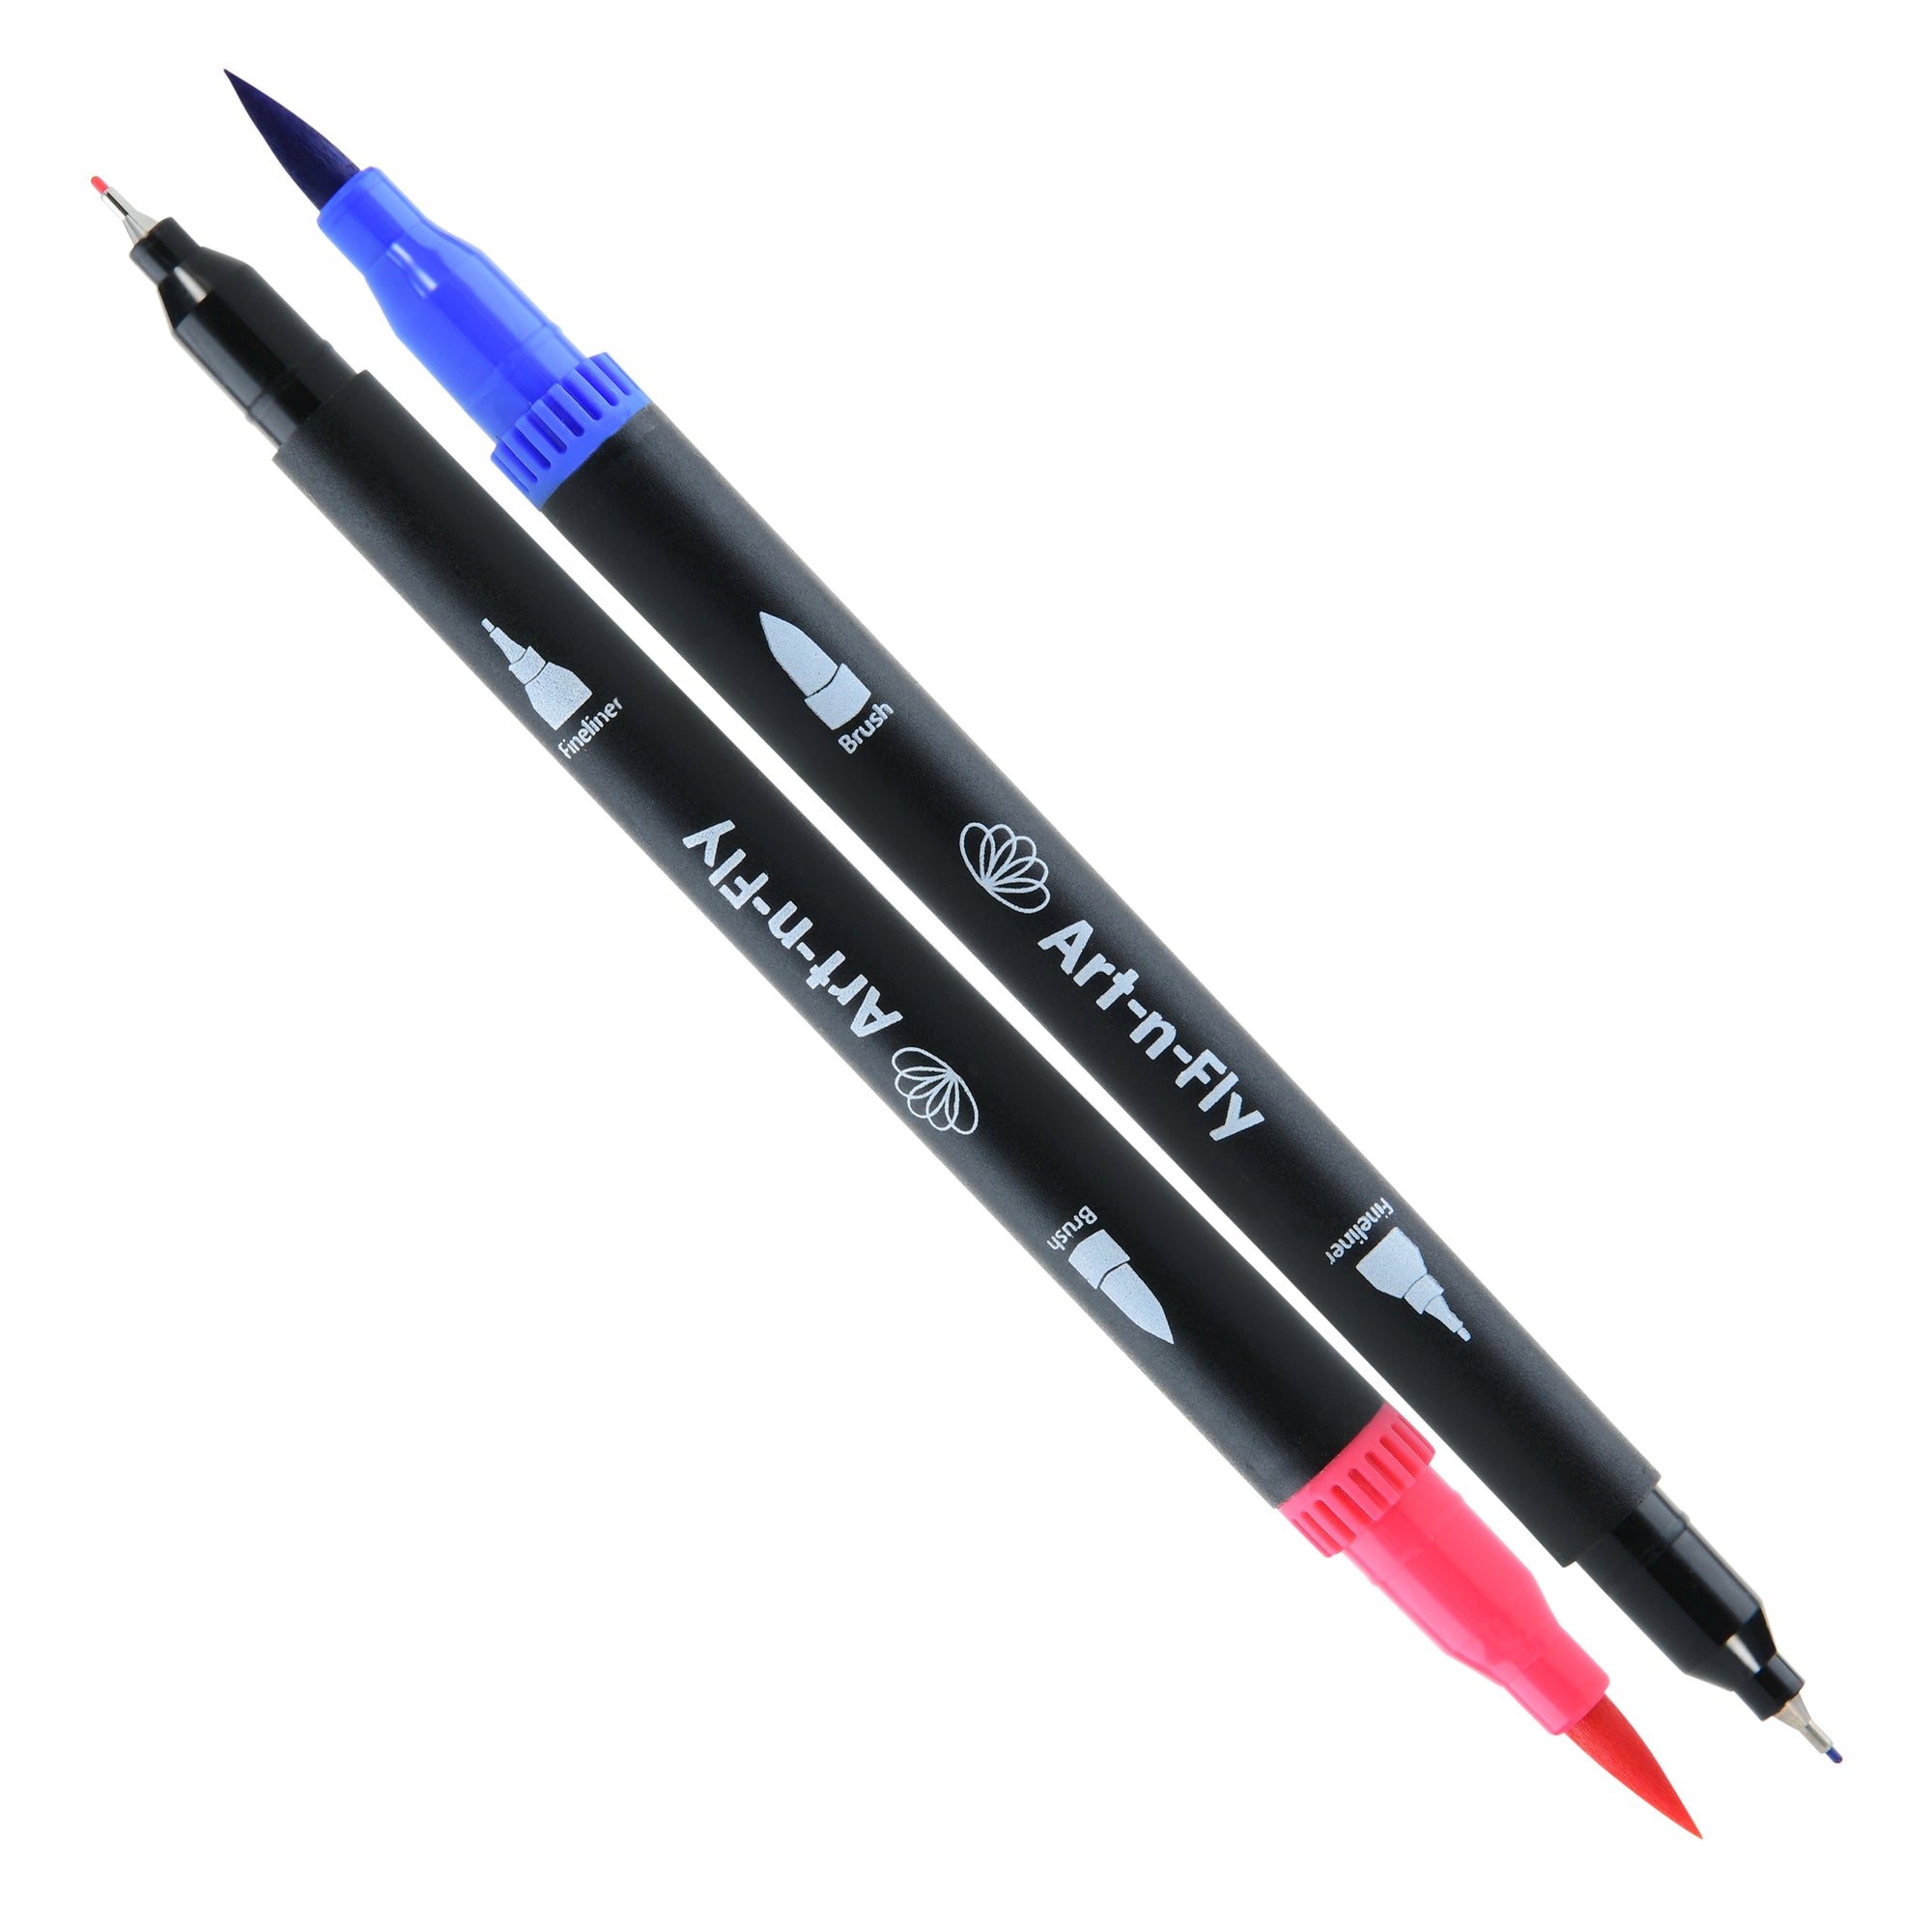 Art-n-Fly 24 Watercolor Paint Brush Pens - Markers for Water Color Calligraphy Lettering and Drawing - Flexible Real Brush Tips - Gorgeous Pen Color